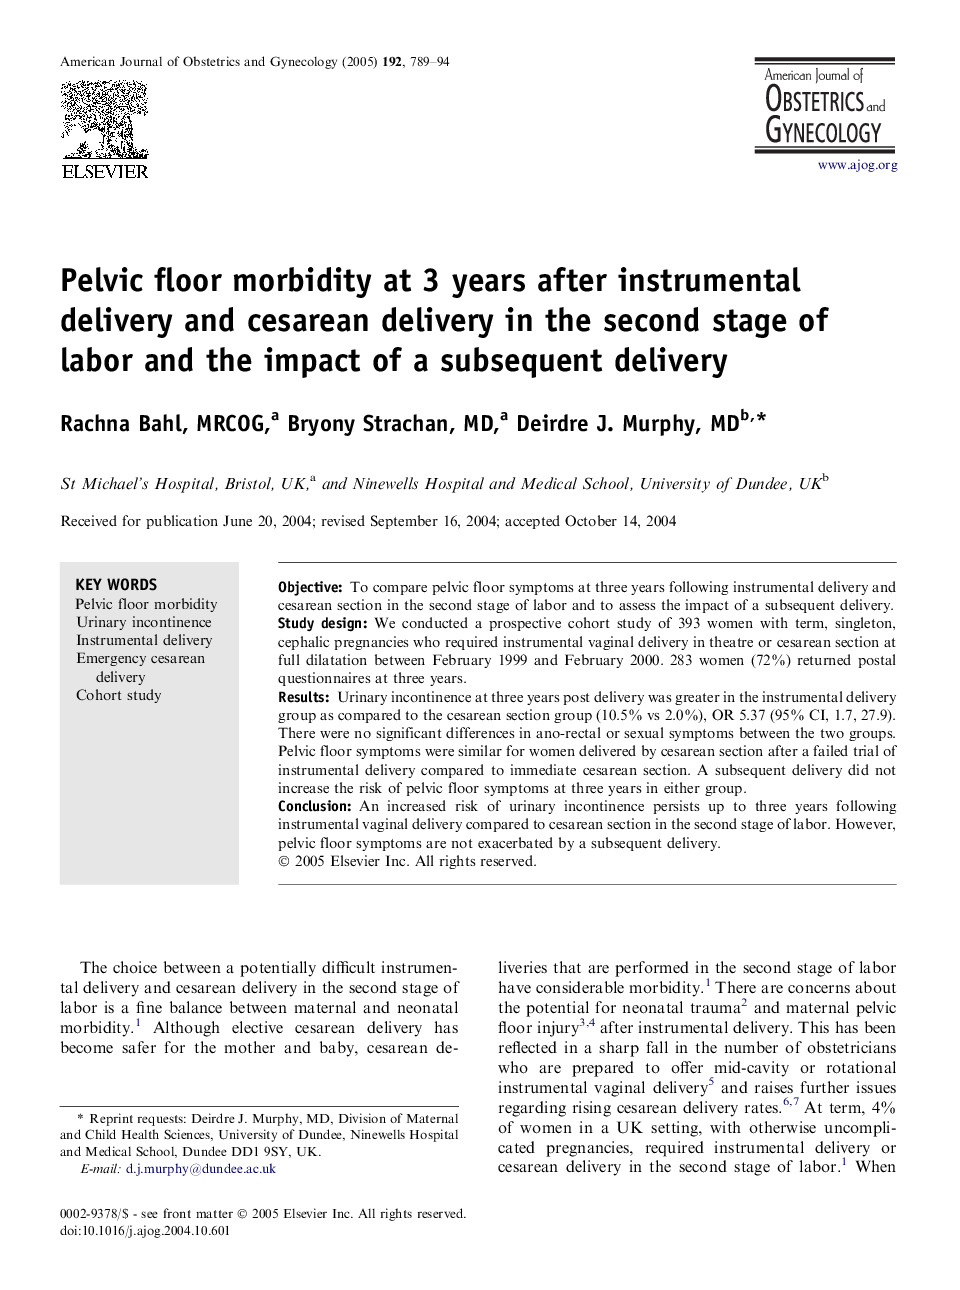 Pelvic floor morbidity at 3 years after instrumental delivery and cesarean delivery in the second stage of labor and the impact of a subsequent delivery